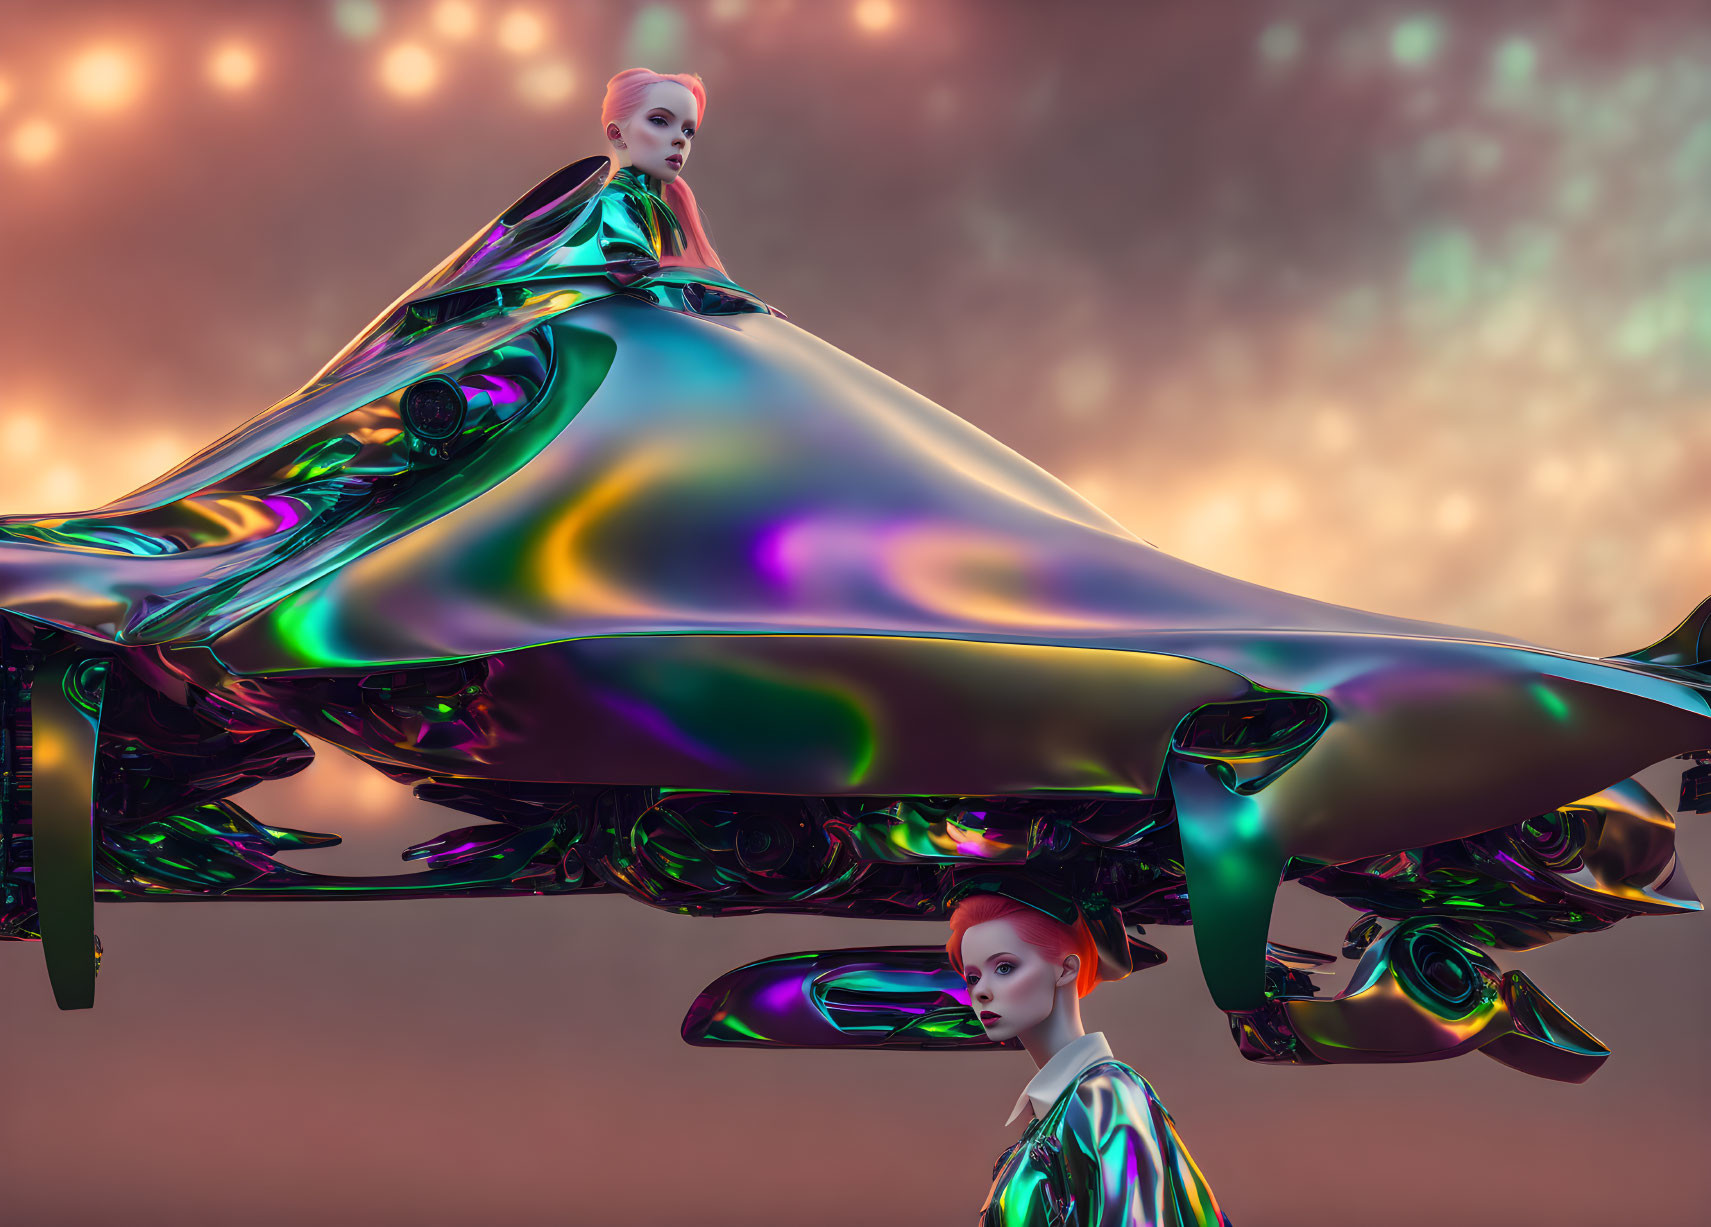 Futuristic humanoid figures in iridescent clothing emerging from metallic structure